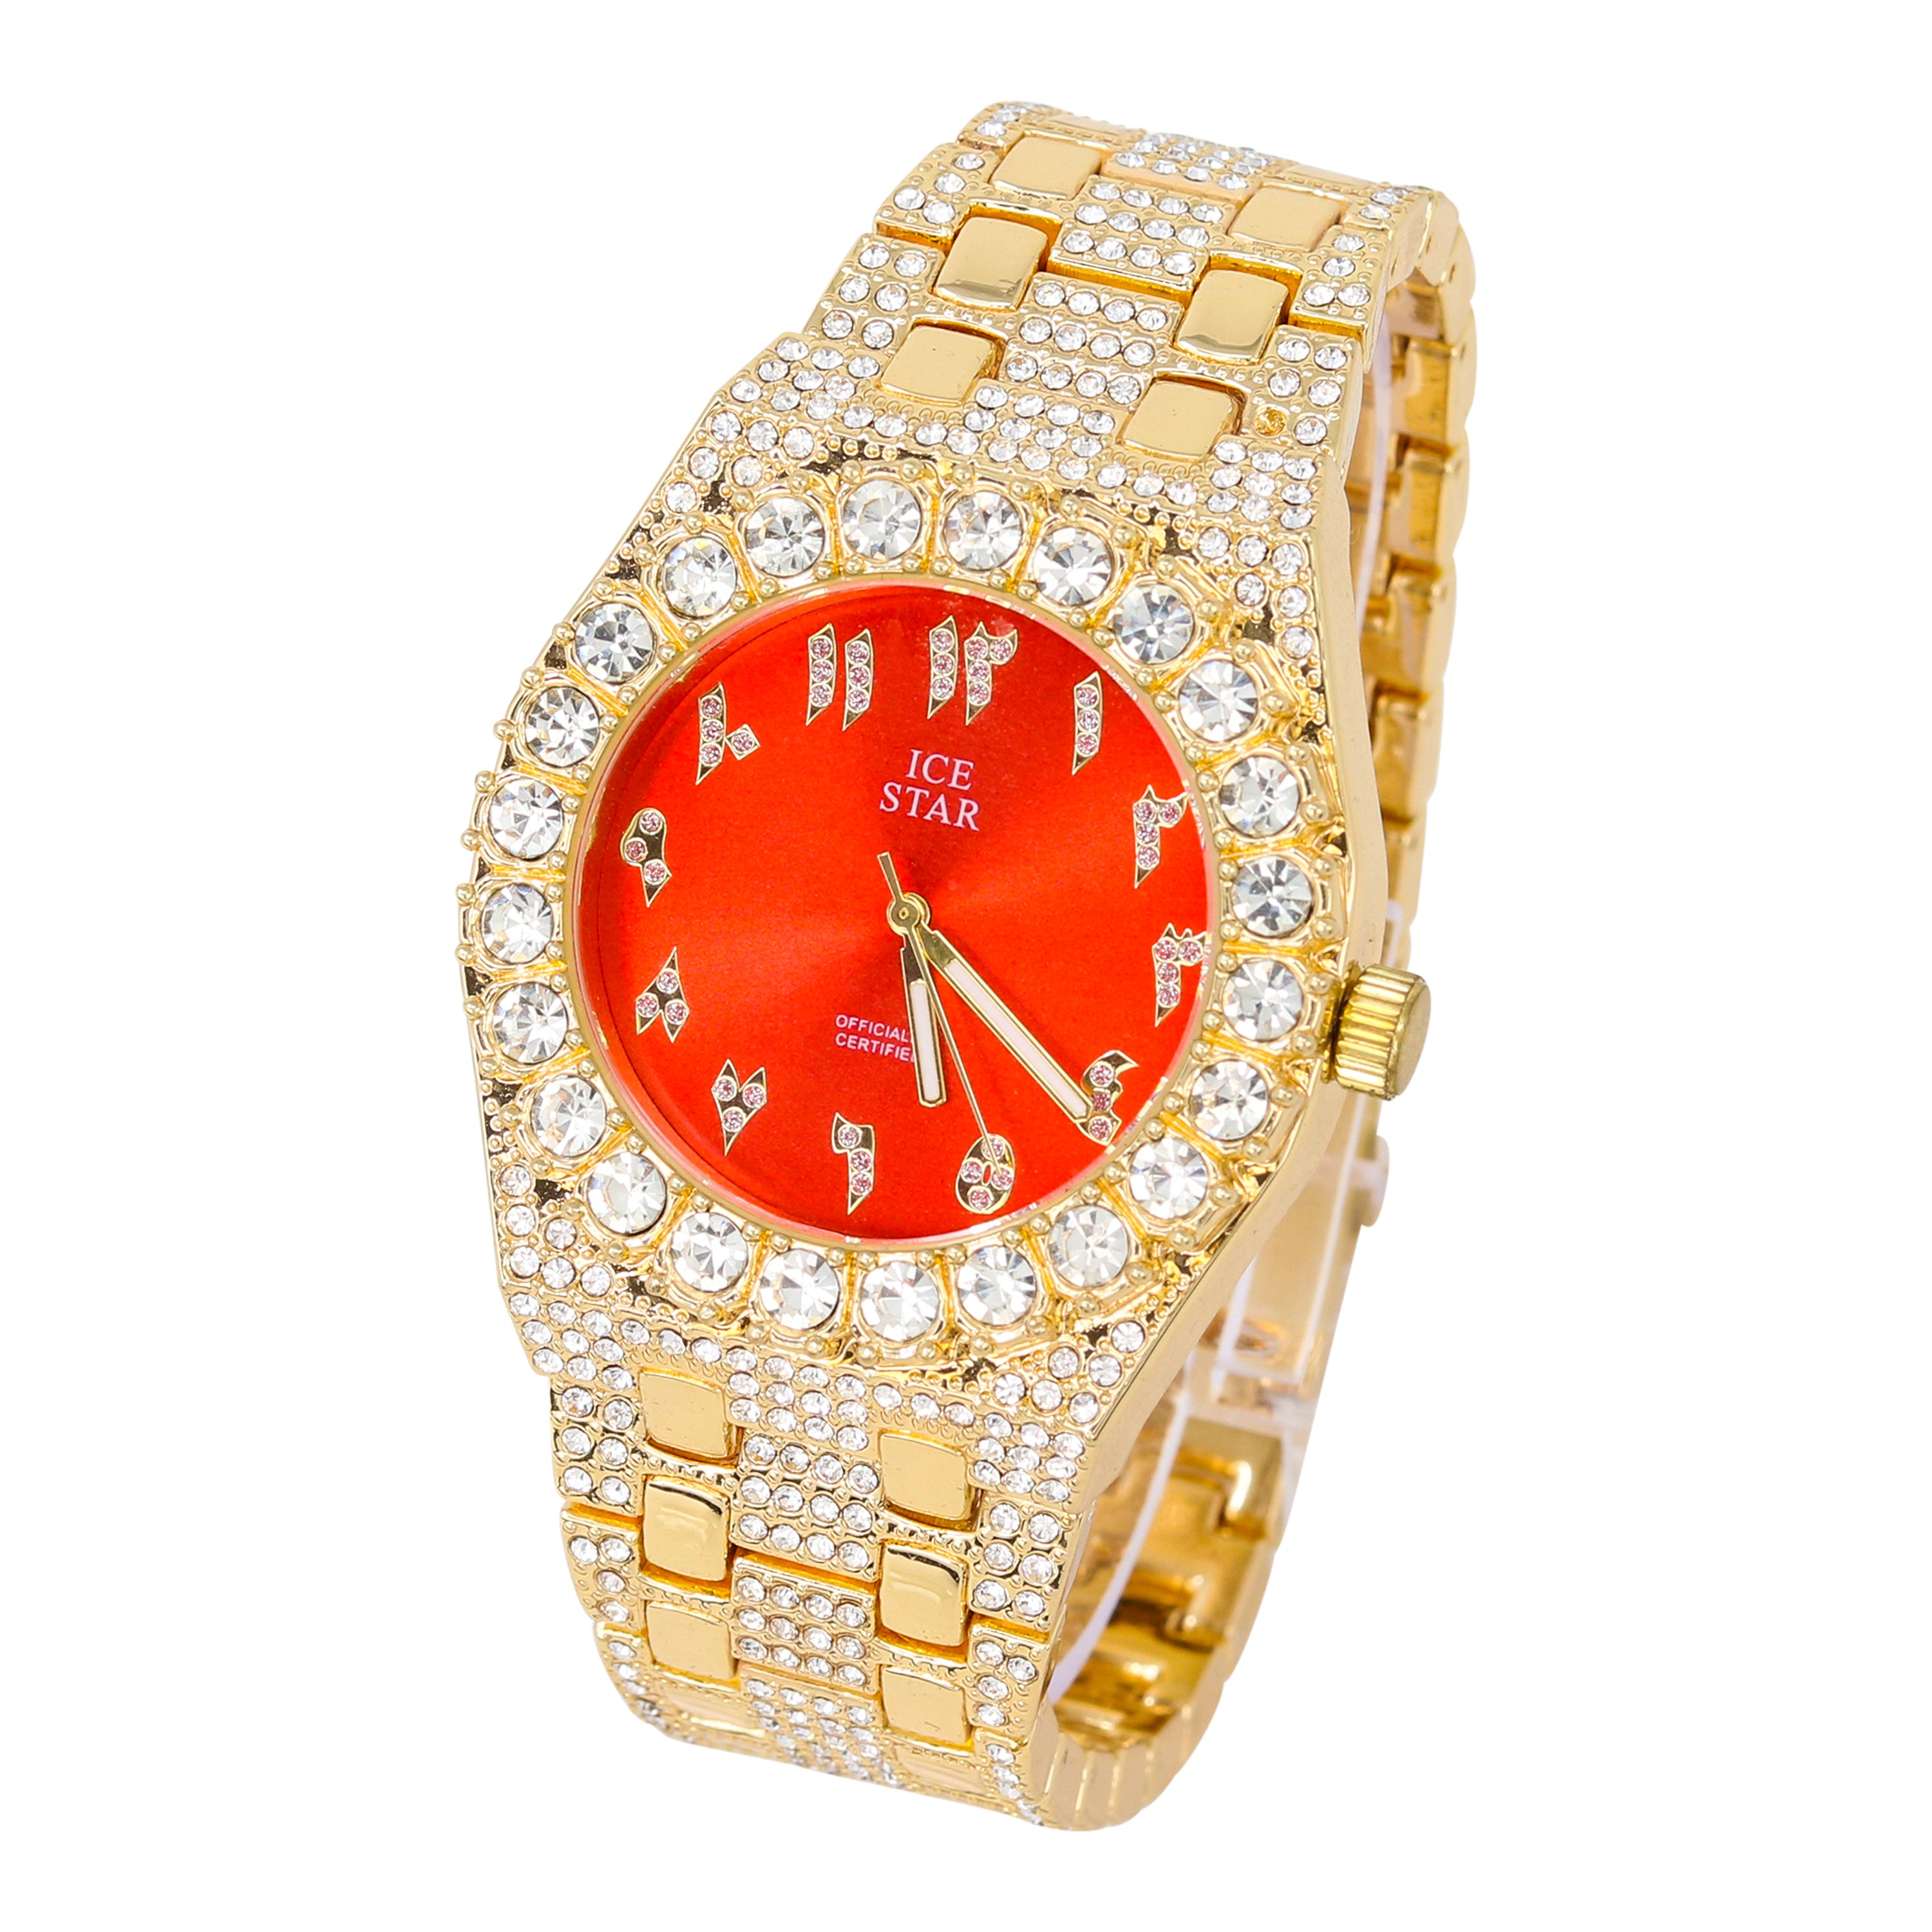 Men's Round Iced Out Watch 41mm Gold - Arab Dial